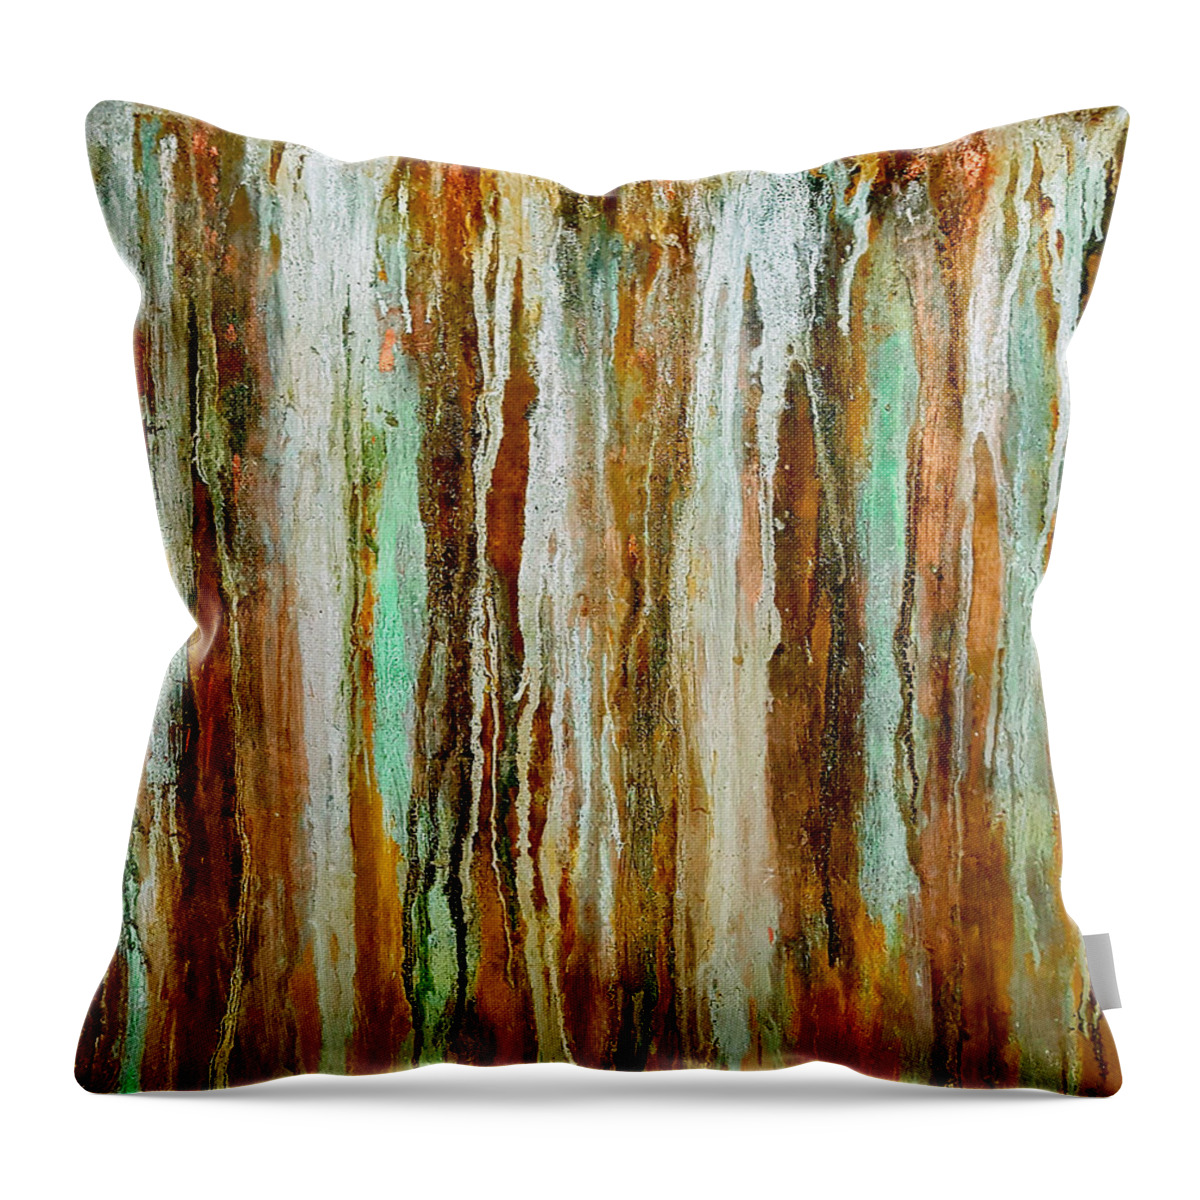 Resin Art Throw Pillow featuring the painting Urban Decay Series 3 by Jane Biven